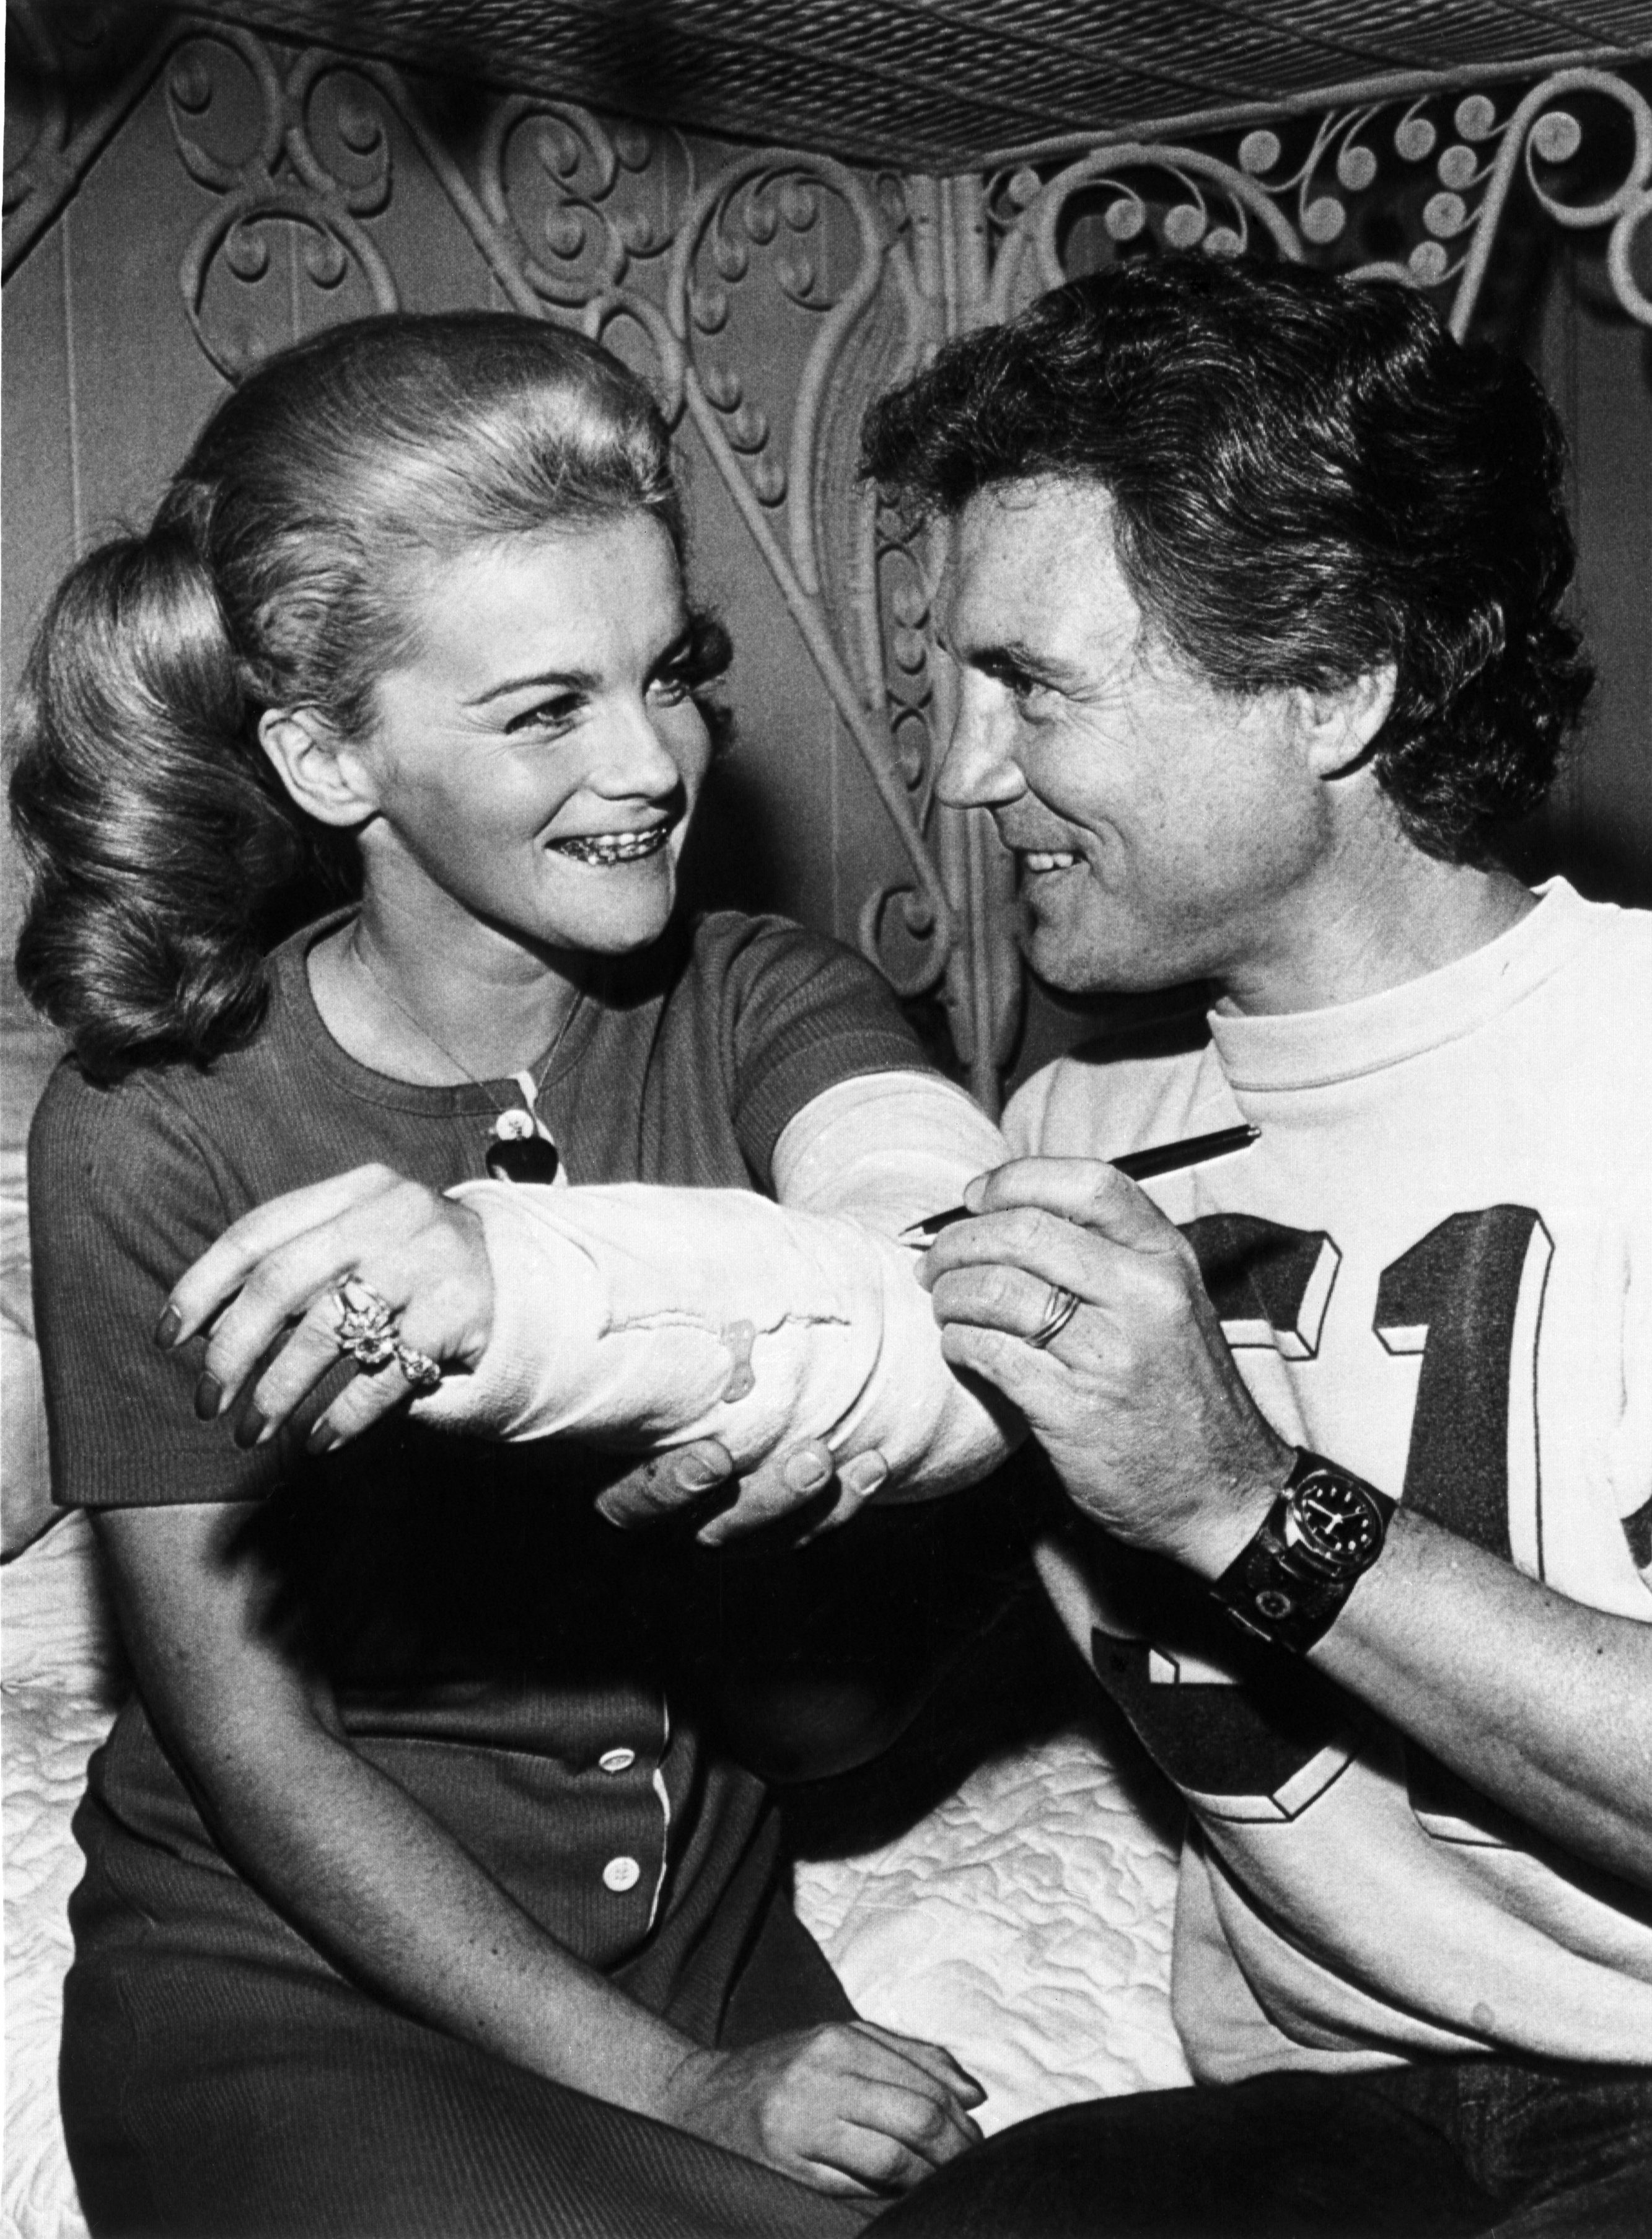 Ann-Margret after suffering a near fatal accident in a fall from a platform during her act in Lake Tahoe, has the cast on her broken left arm signed by her spouse, Roger Smith. / Source: Getty Images